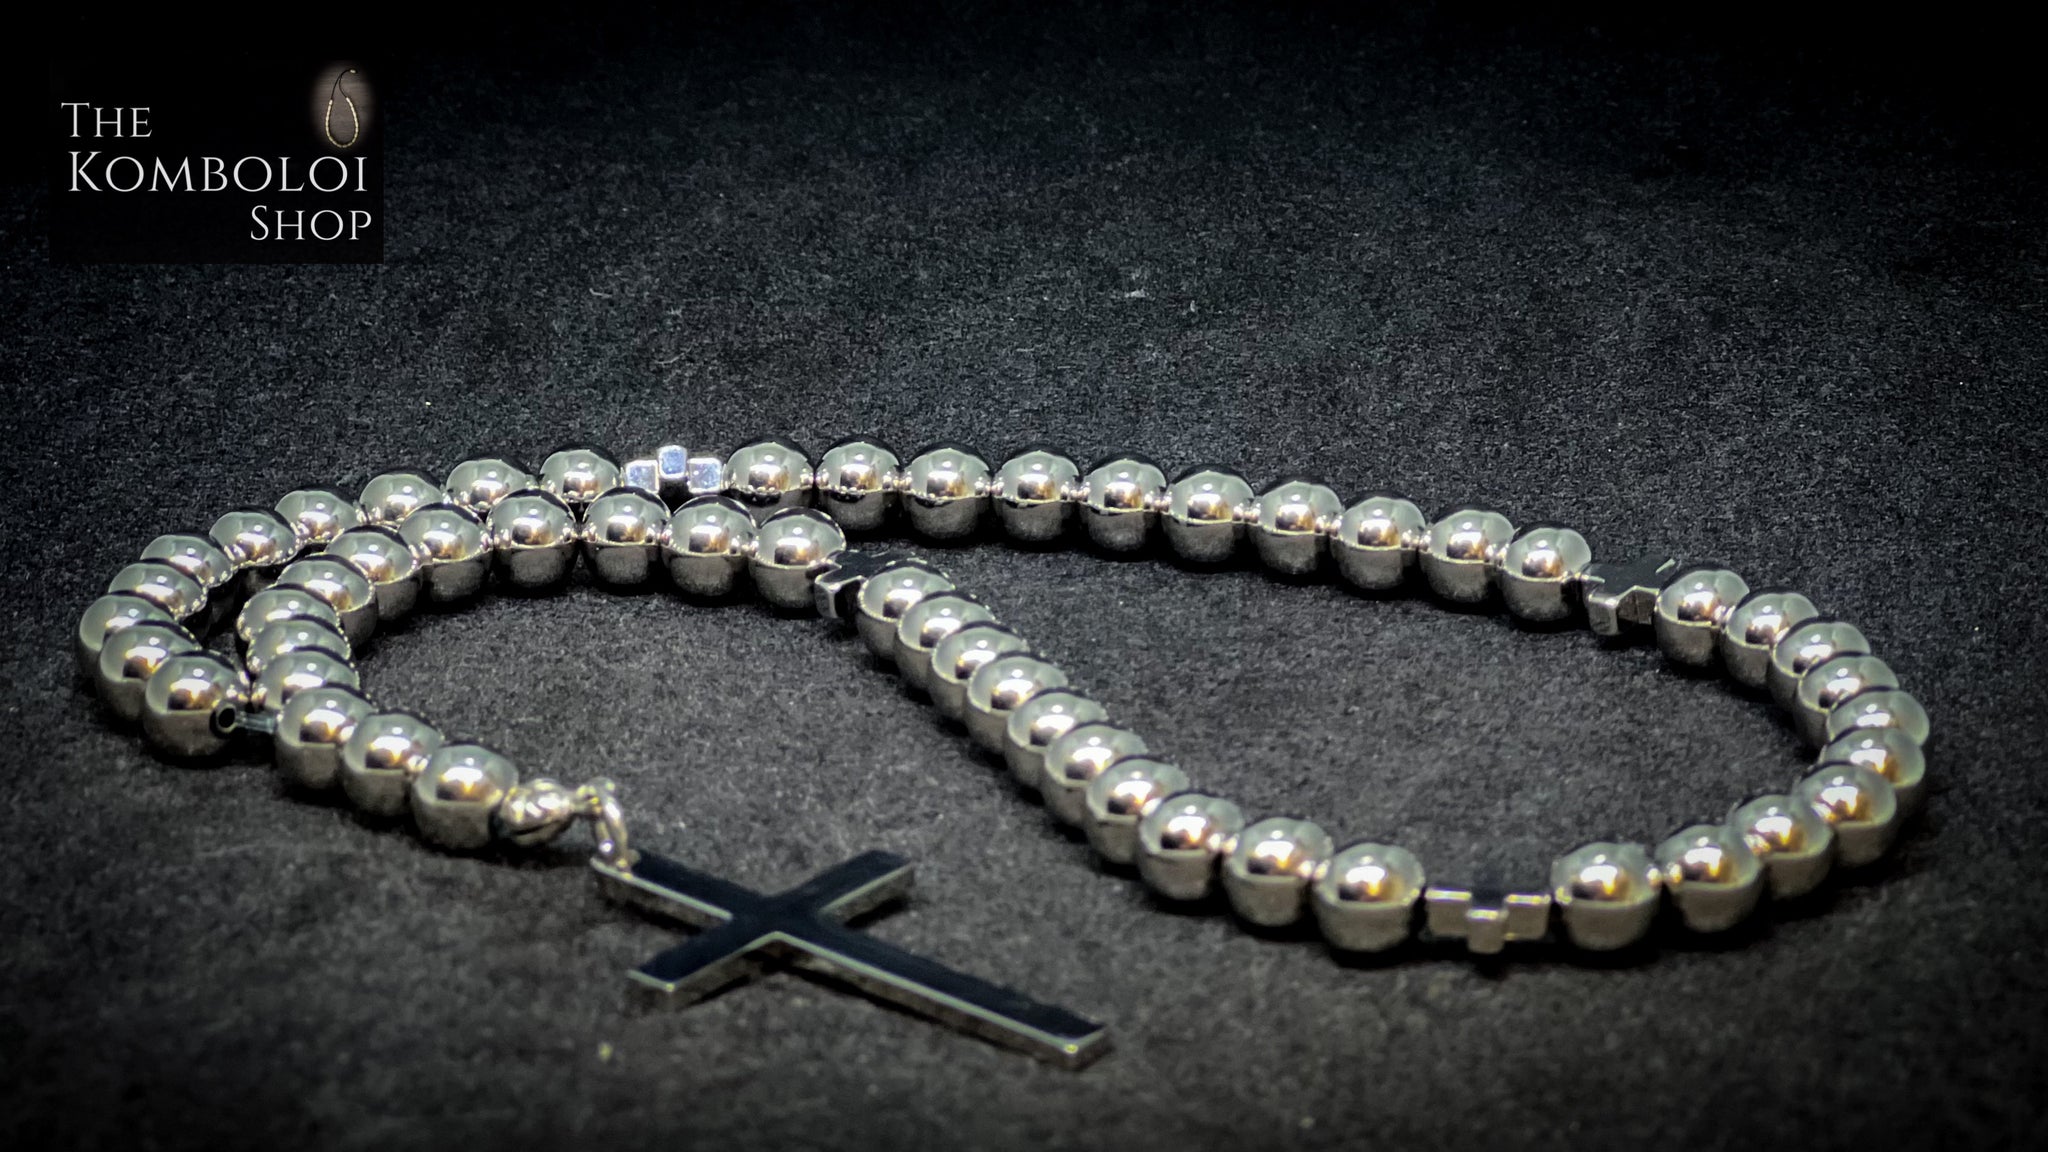 Stainless Steel 50 Bead Orthodox Prayer Beads with Stainless Steel Cross